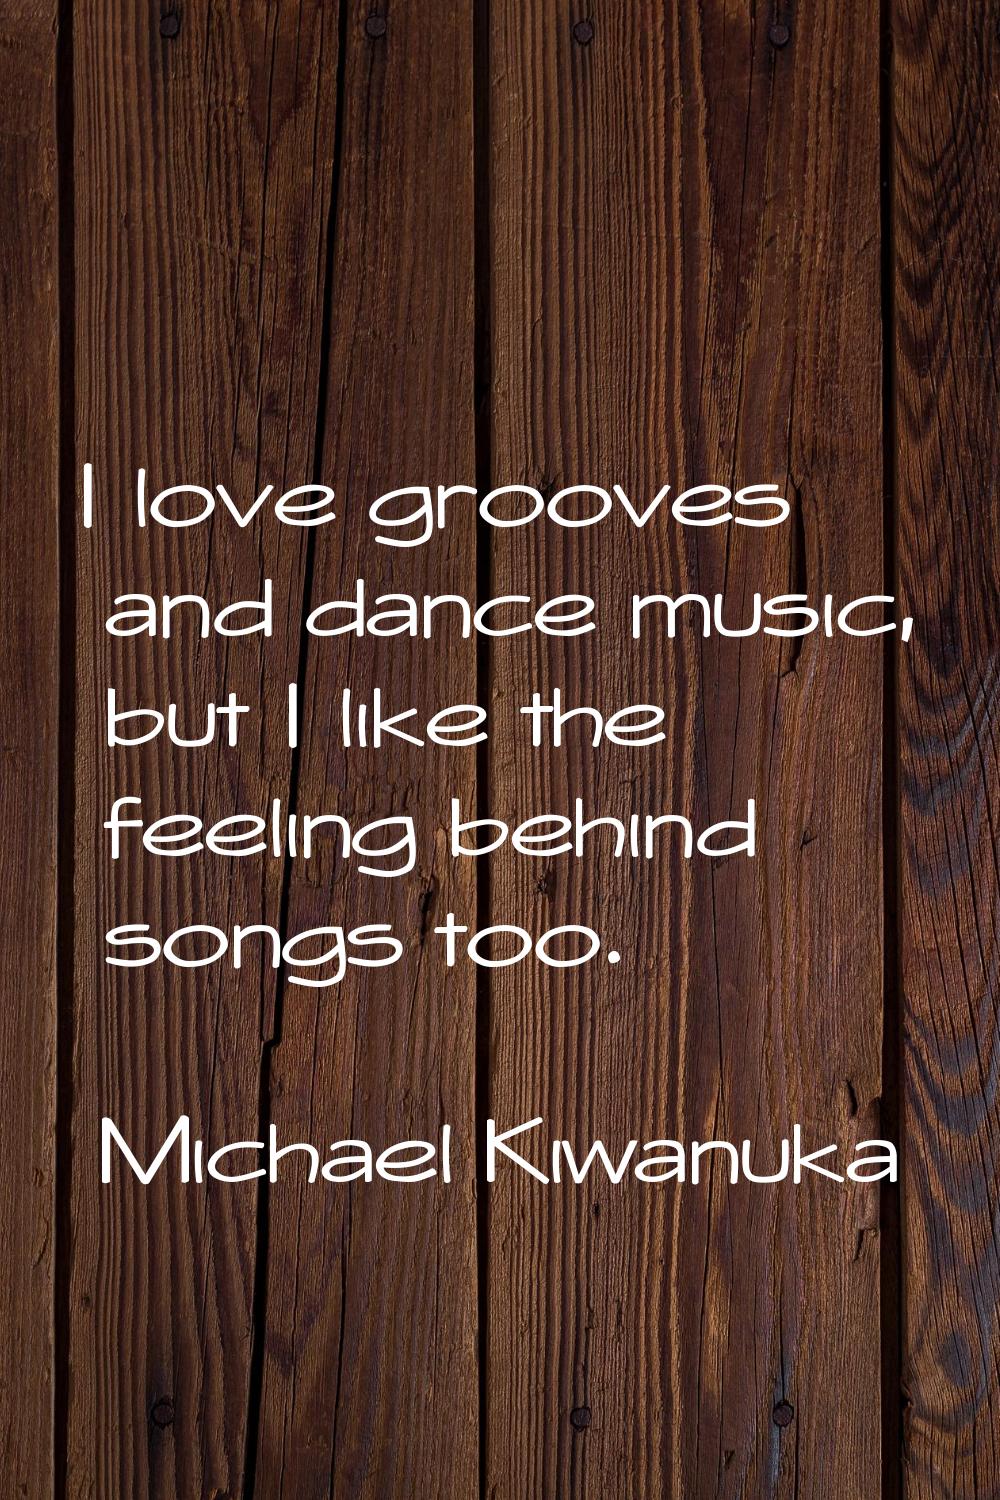 I love grooves and dance music, but I like the feeling behind songs too.